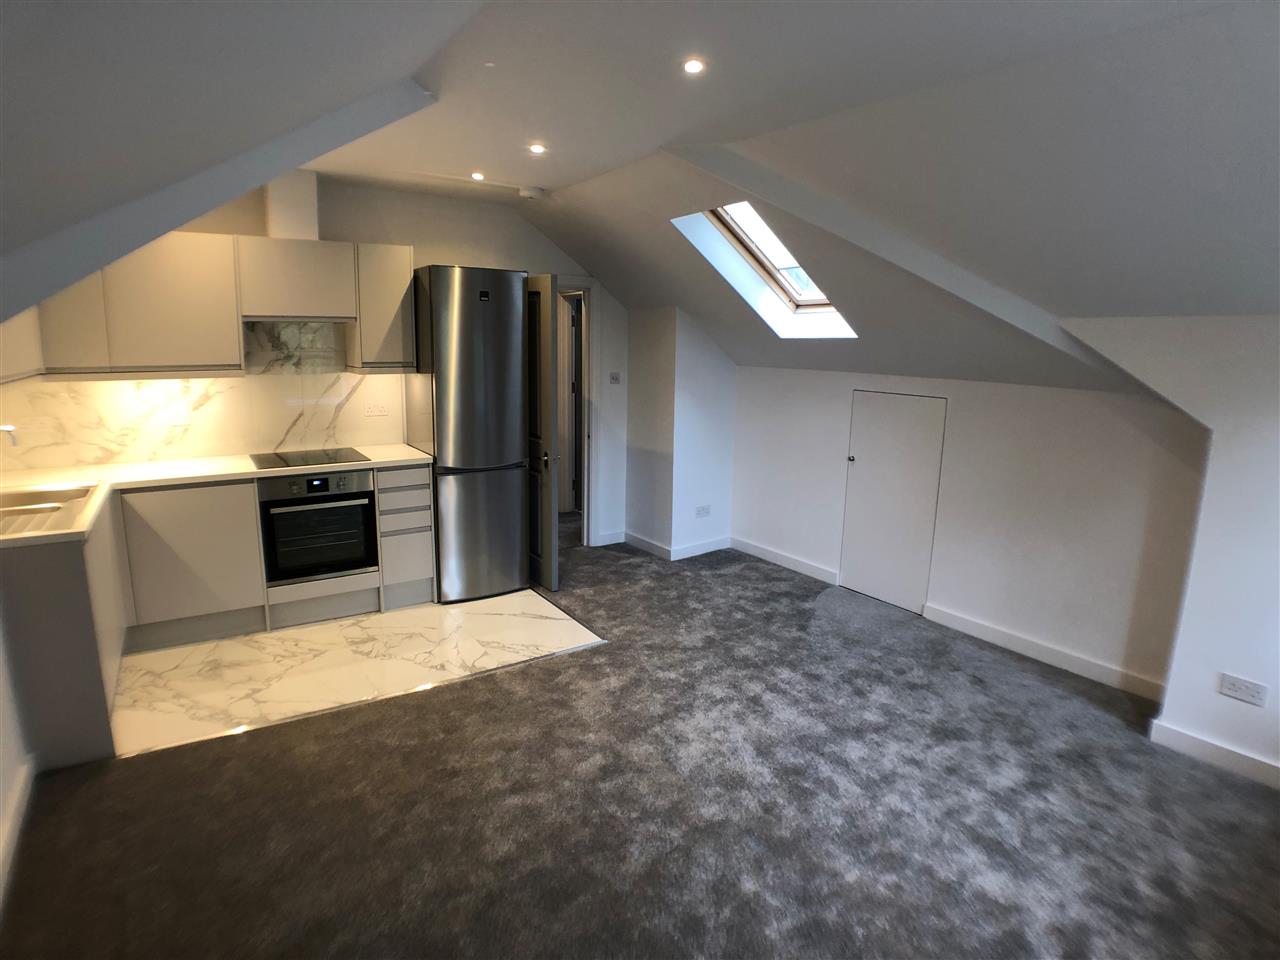 RENT FIXED FOR TWO YEARS & AVAILABLE IMMEDIATELY! A brand new lovely modern conversion on the top floor (3rd) of a lovely period building, the flat consists of One large double bed, bathroom and open plan kitchen/reception room. The flat is full of character being built into the loft with ...